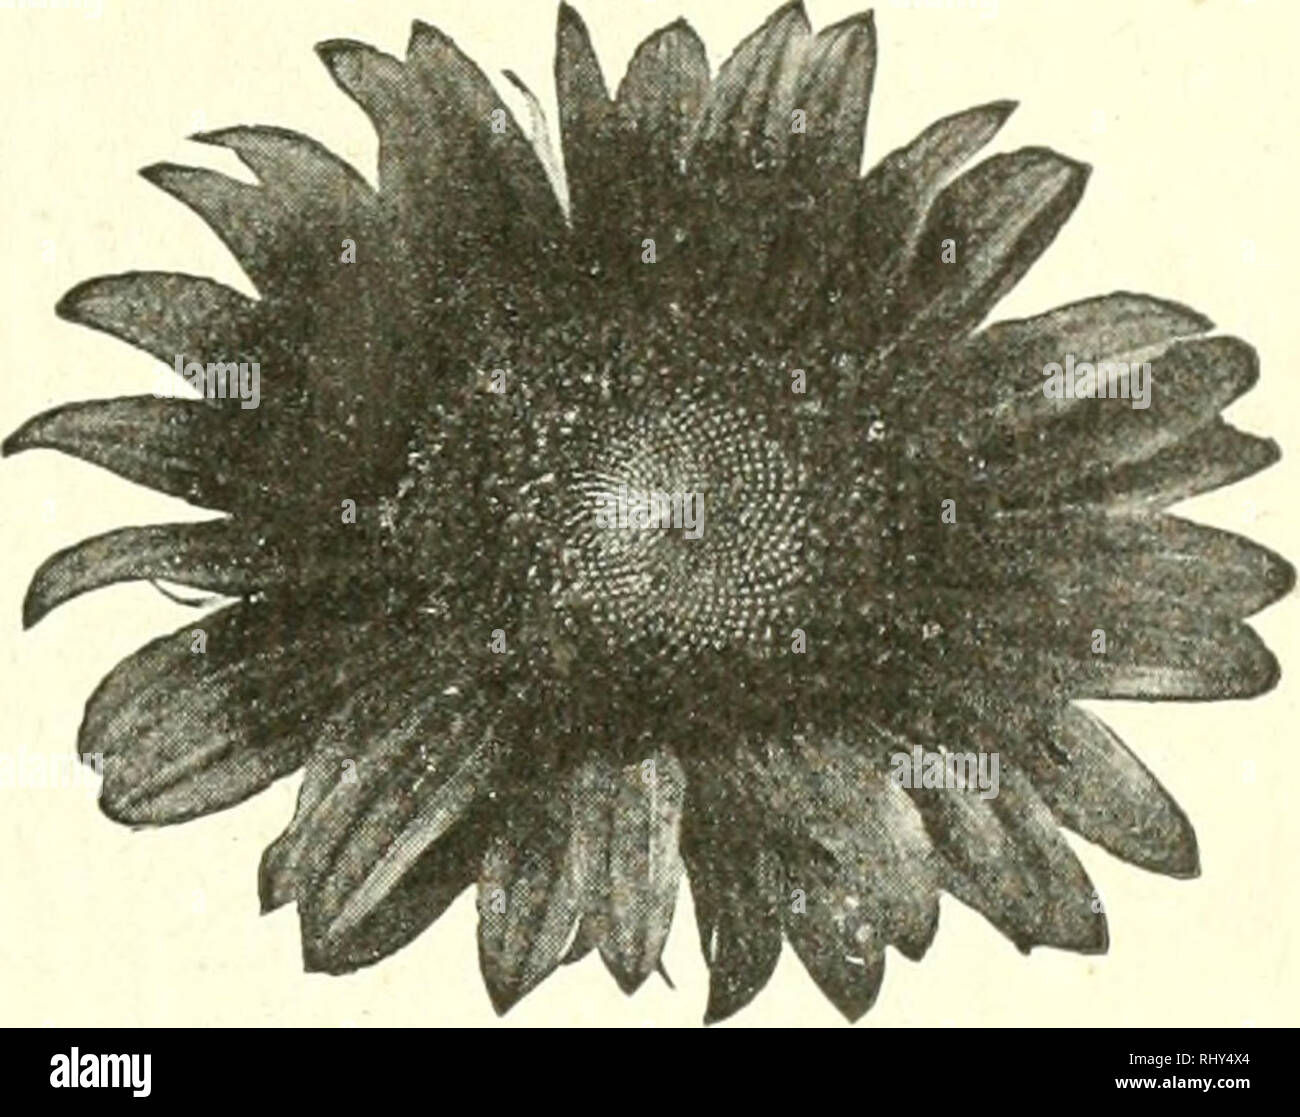 . Beginners botany. Botany. THE FLOWER —ITS PARTS AND FORMS 141. Fig. 189. — Head of Sunflower. florets are inclosed in a more or less dense and usually green involucre. In the thistle (Fig. 190) this involucre is prickly. A longitudinal section discloses the flo- rets, all attached at bot- tom to a common torus, and densely packed in the involucre. The pink tips of these florets con- stitute the showy part of the head. Each floret of the this- tle (Fig. 190) is a com- plete flower. At a is the ovary. At (^ is a much-divided plumy calyx, known as the pappus. The corolla is long- tubed, rising  Stock Photo